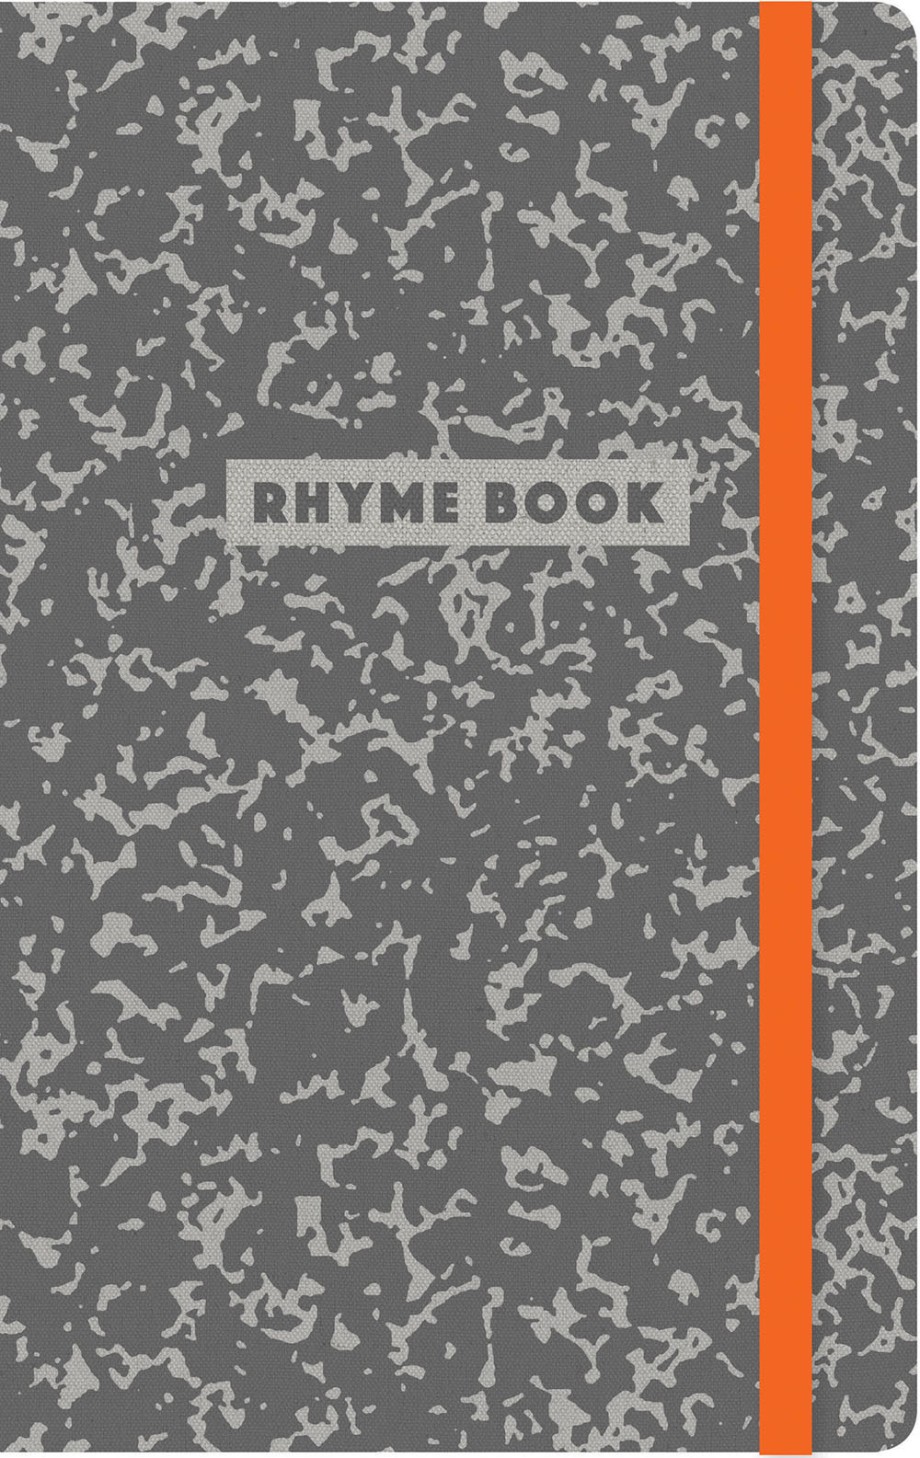 Rhyme Book A lined notebook with quotes, playlists, and rap stats